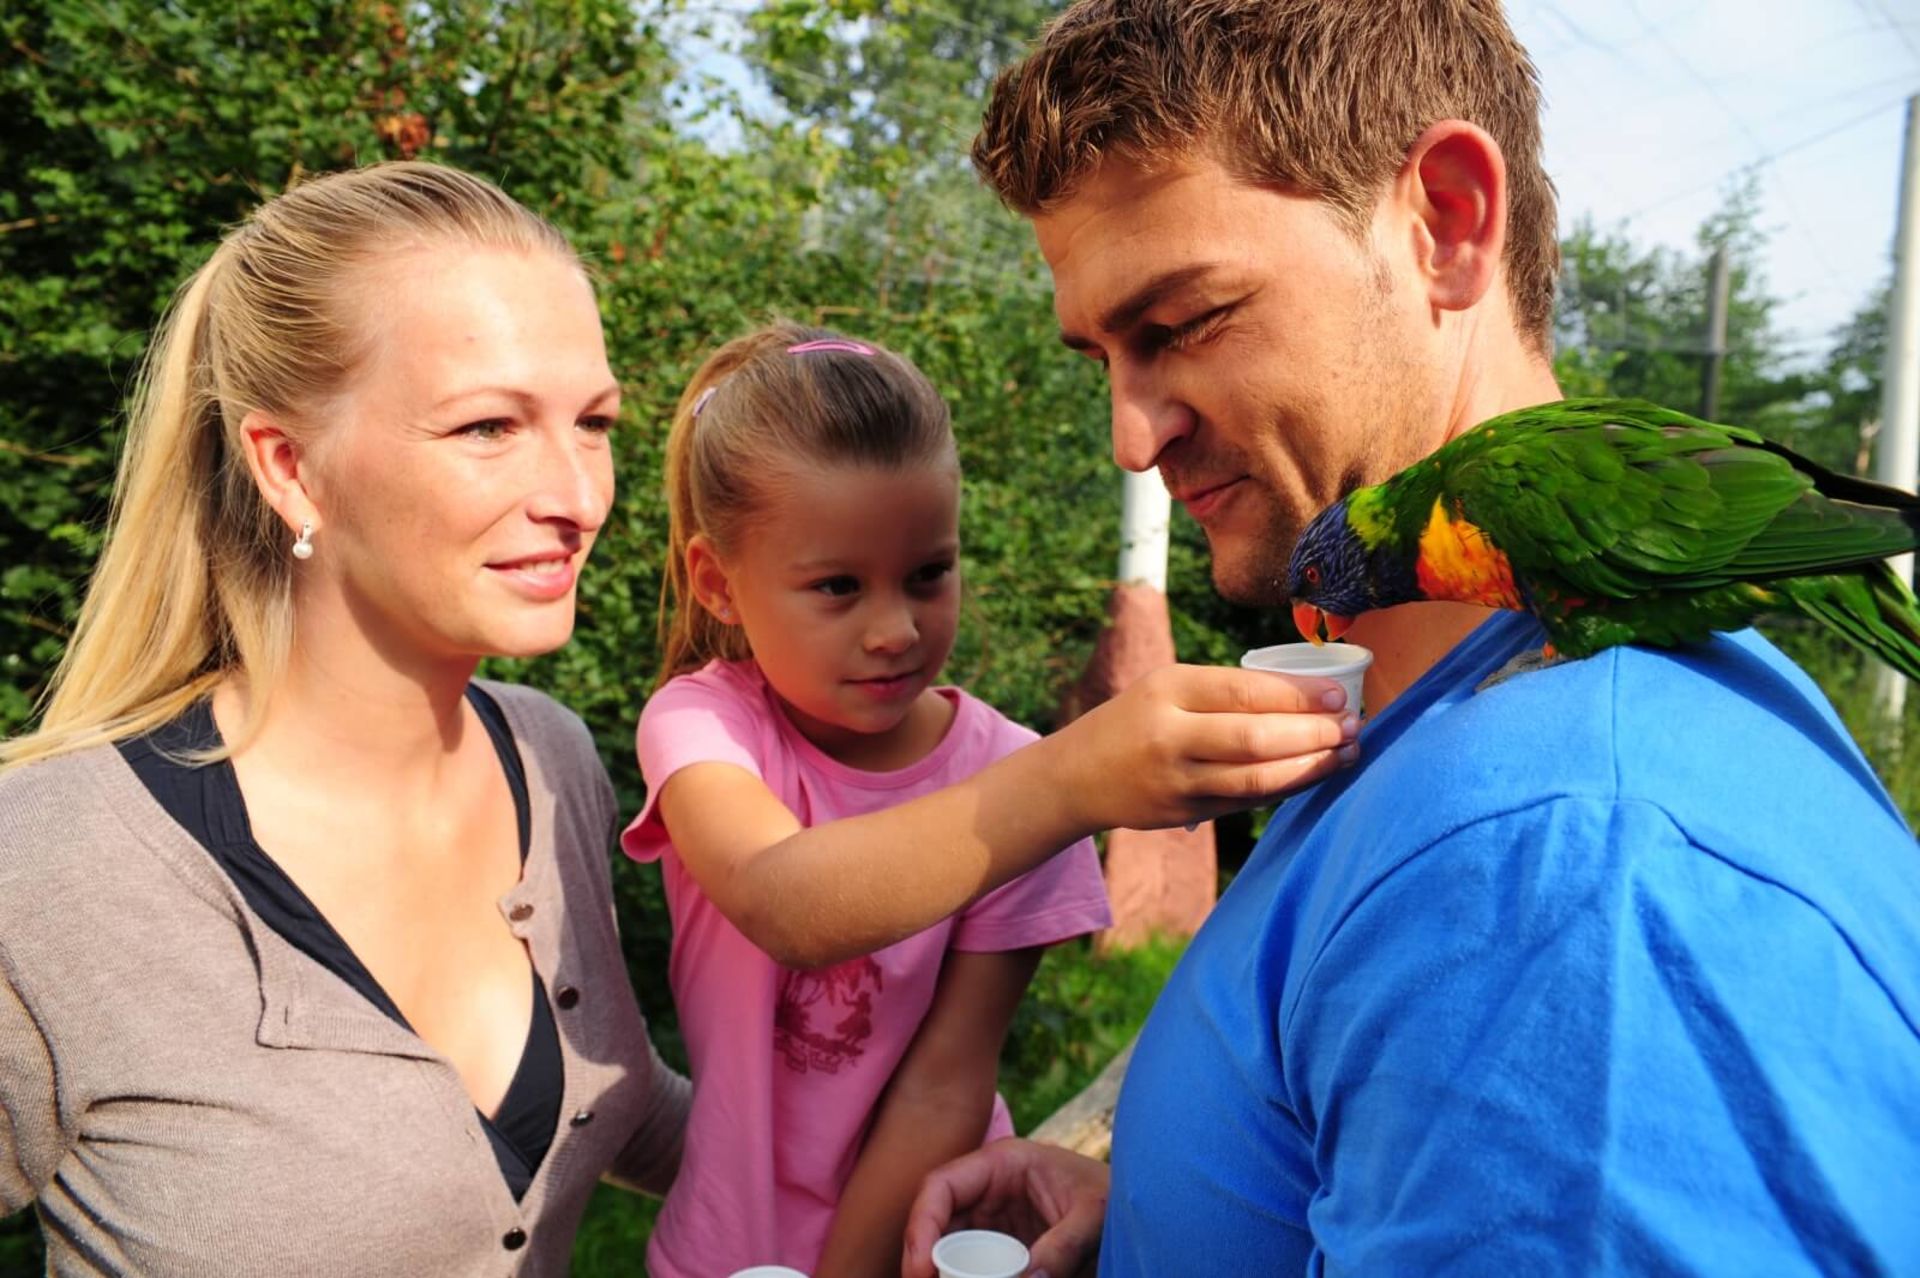 Feed the parrots